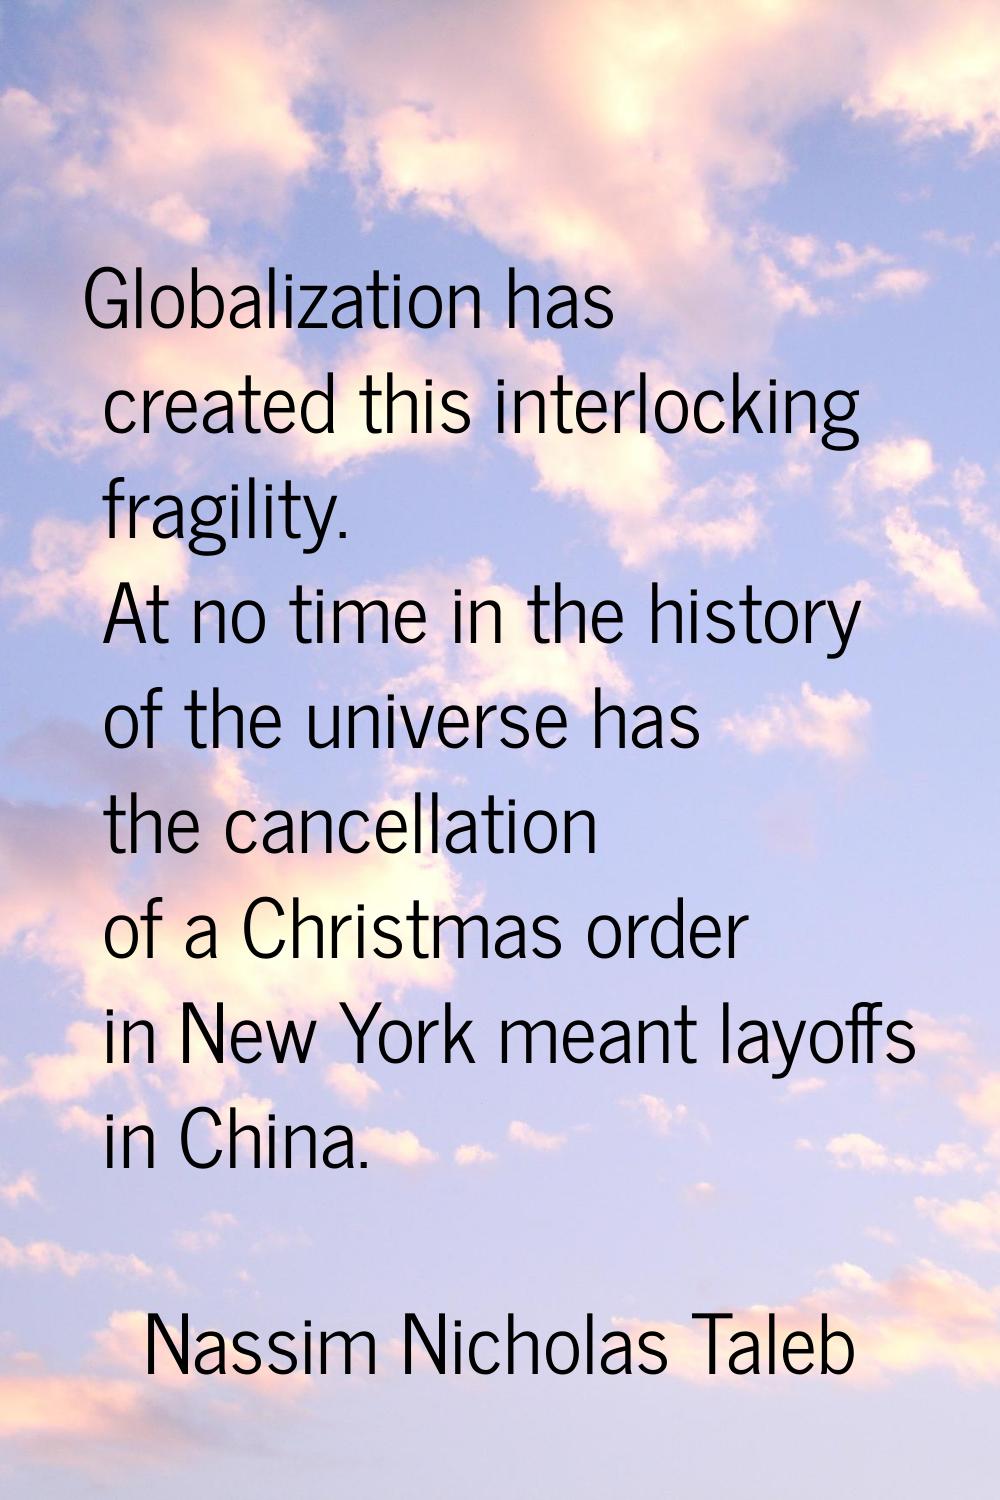 Globalization has created this interlocking fragility. At no time in the history of the universe ha